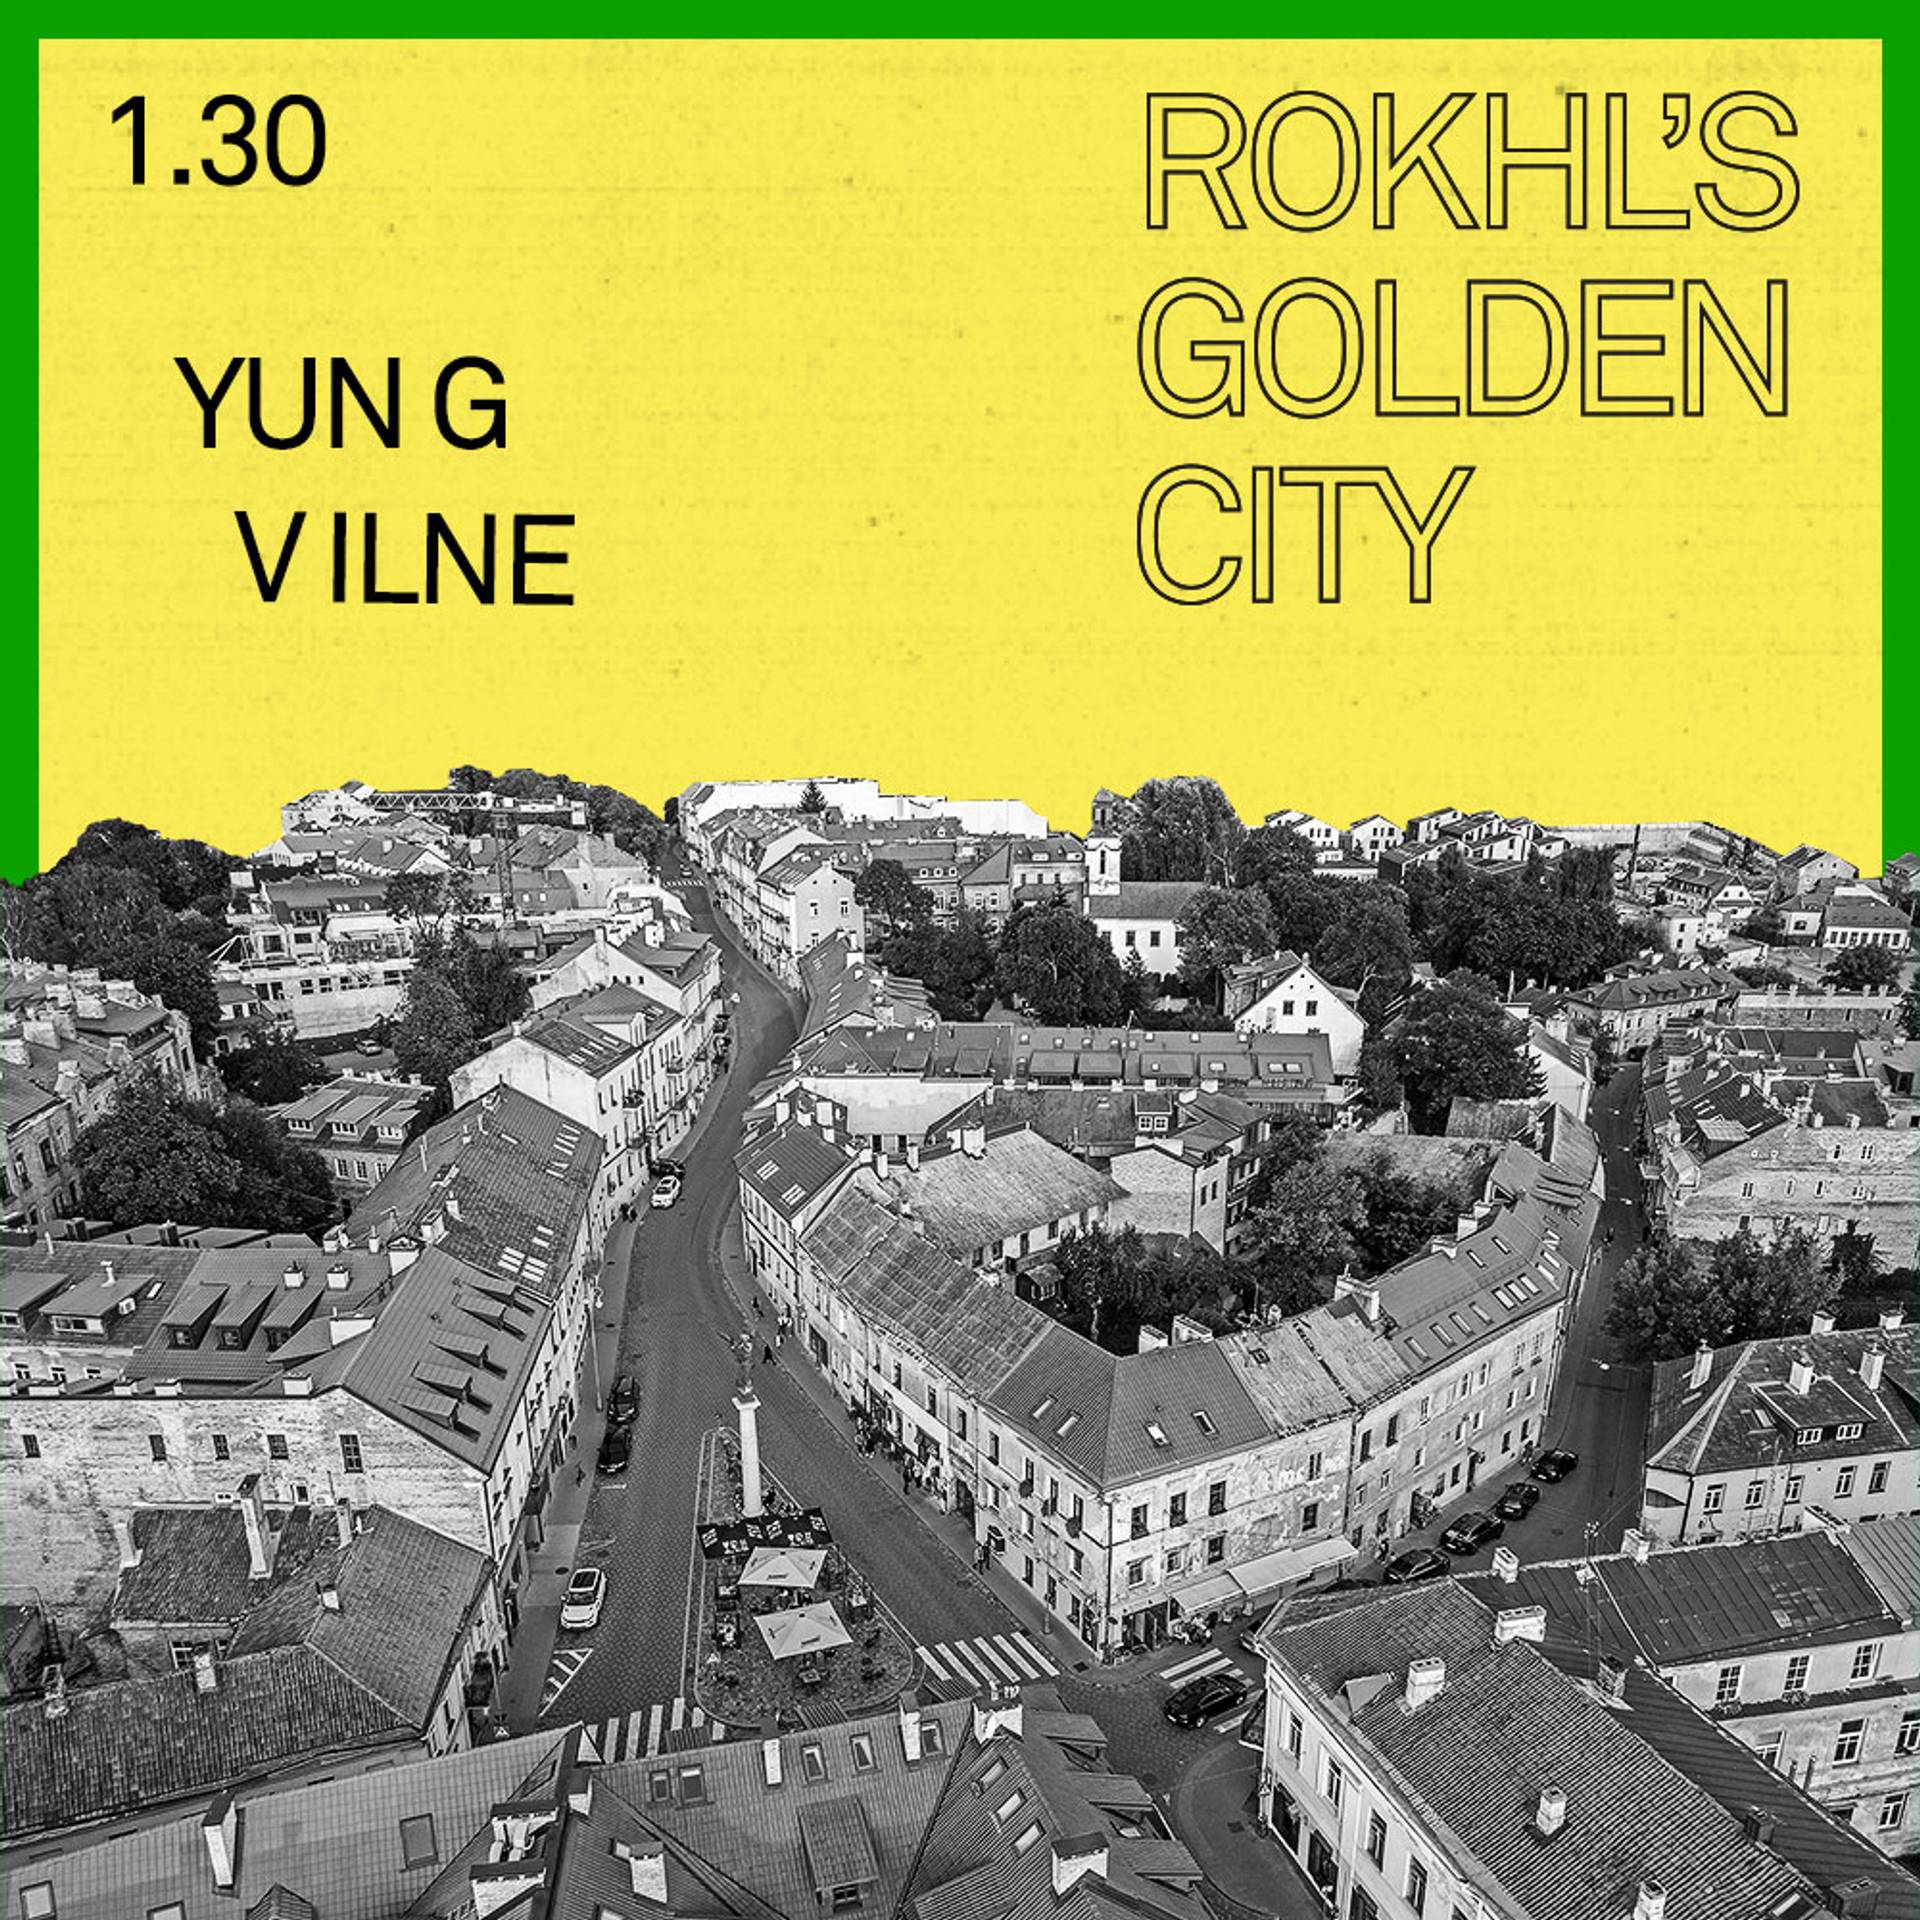 In 2019, an issue of Colloquia (a journal published by the Institute of Lithuanian Literature and Folklore) was dedicated to the 80th anniversary of Toyznt yor Vilne, or Millennial Vilne, Volume 1 of author Zalmen Szyk’s projected three-volume Yiddish-language guide to Vilne (Yiddish), Wilno (Polish), and Vilnius (Lithuanian). 